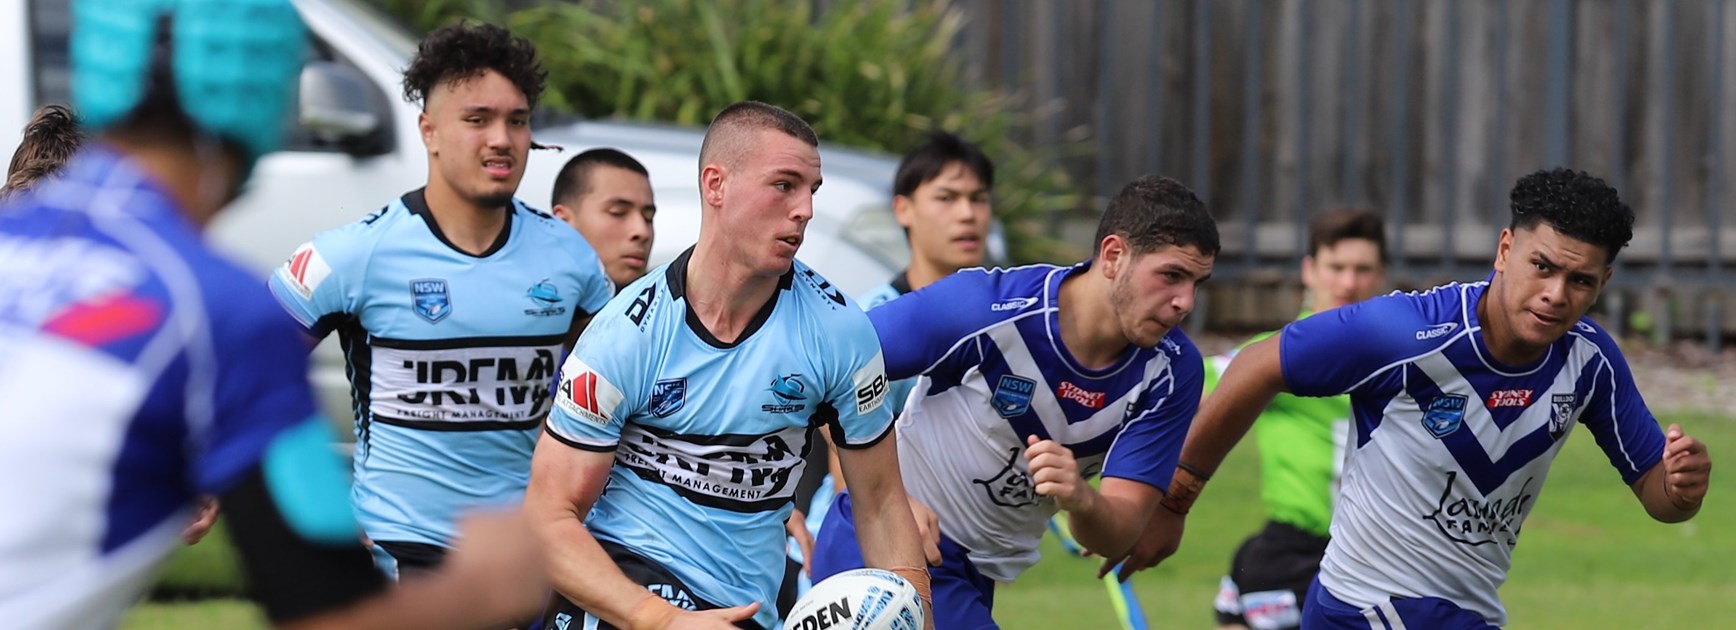 Matthews Sharks tune up for Finals with win over the Dogs